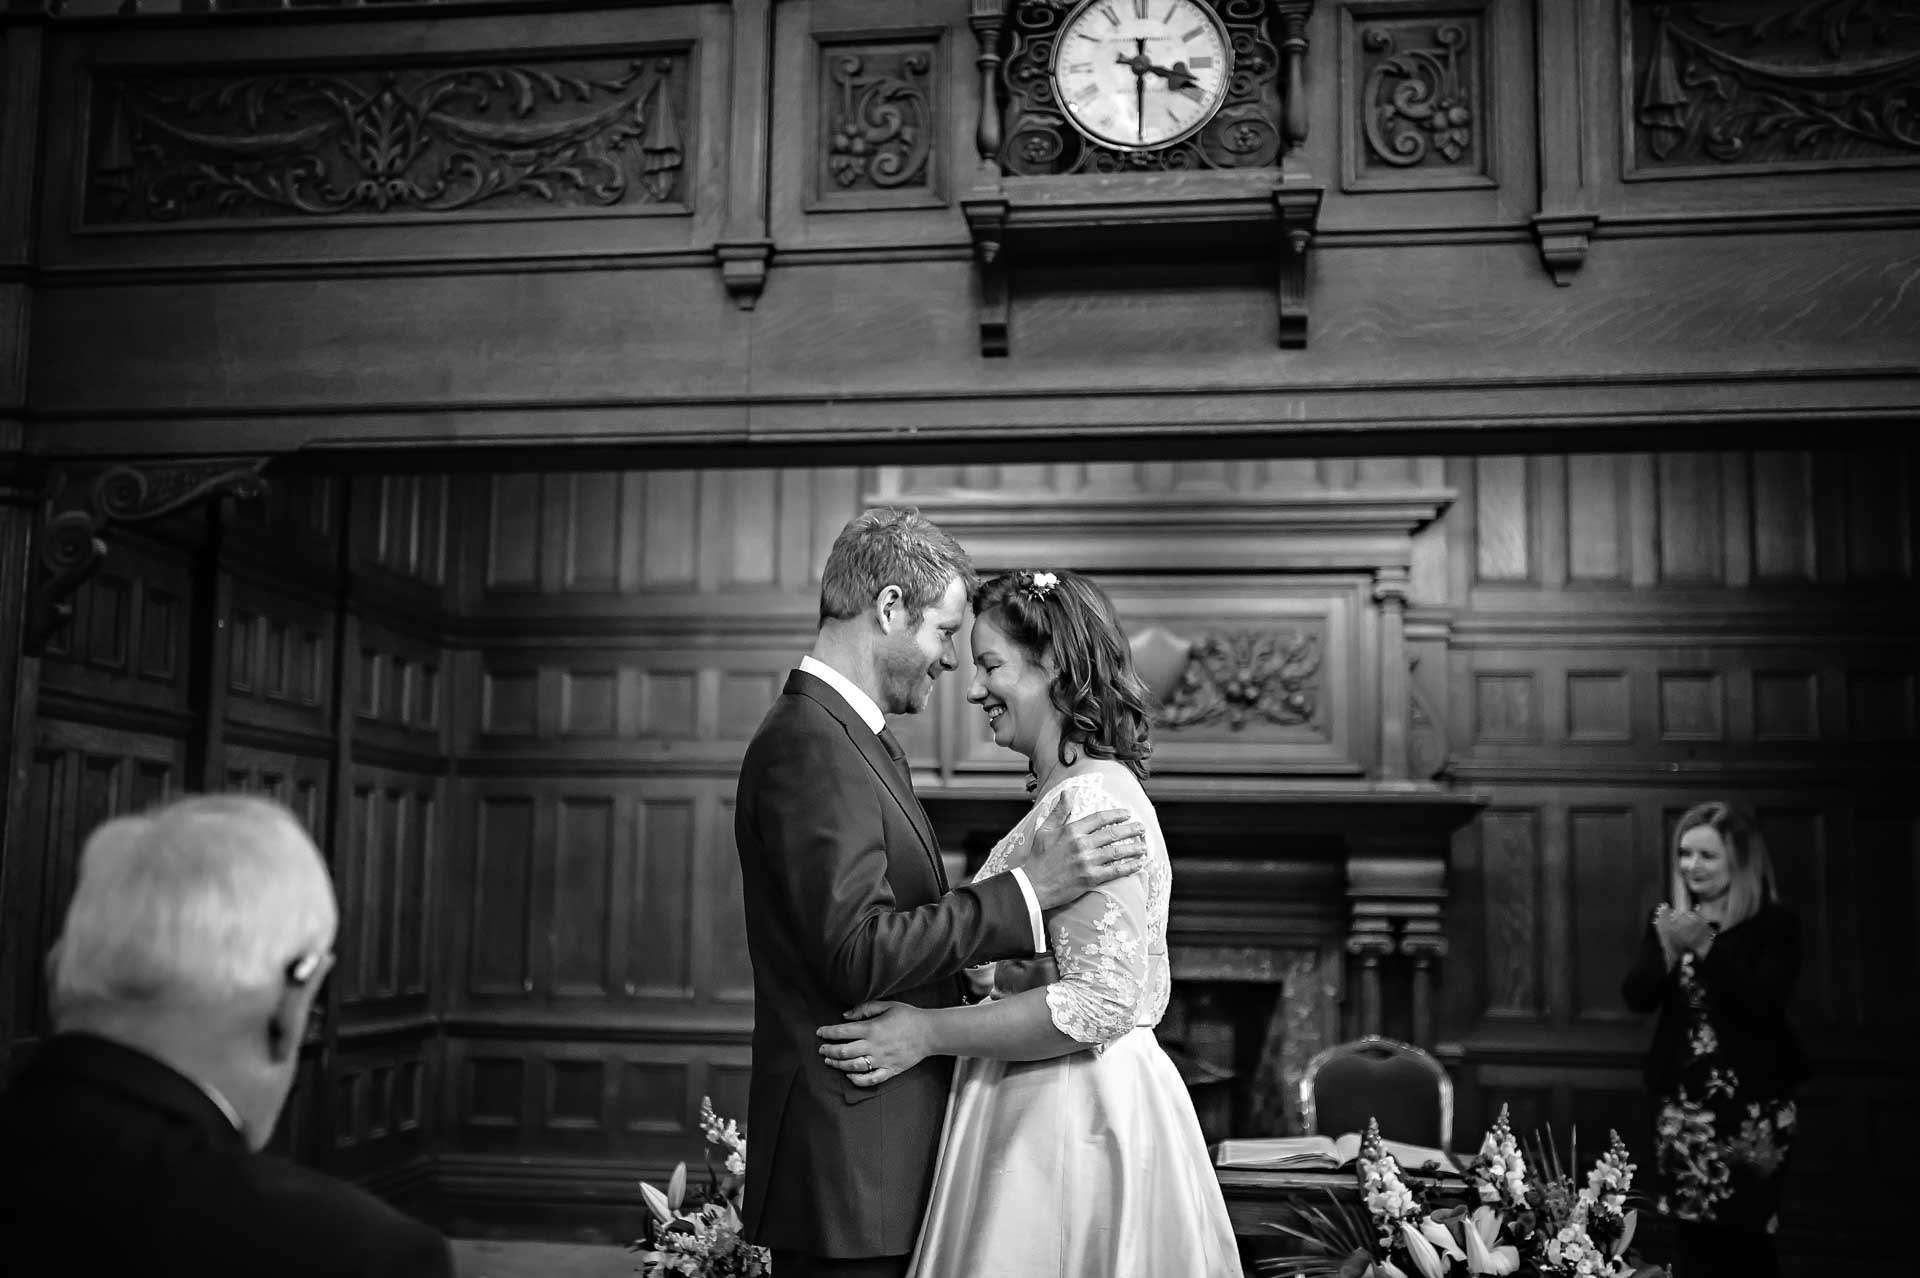 Groom holding bride by shoulders at Chiswick Town Hall wedding